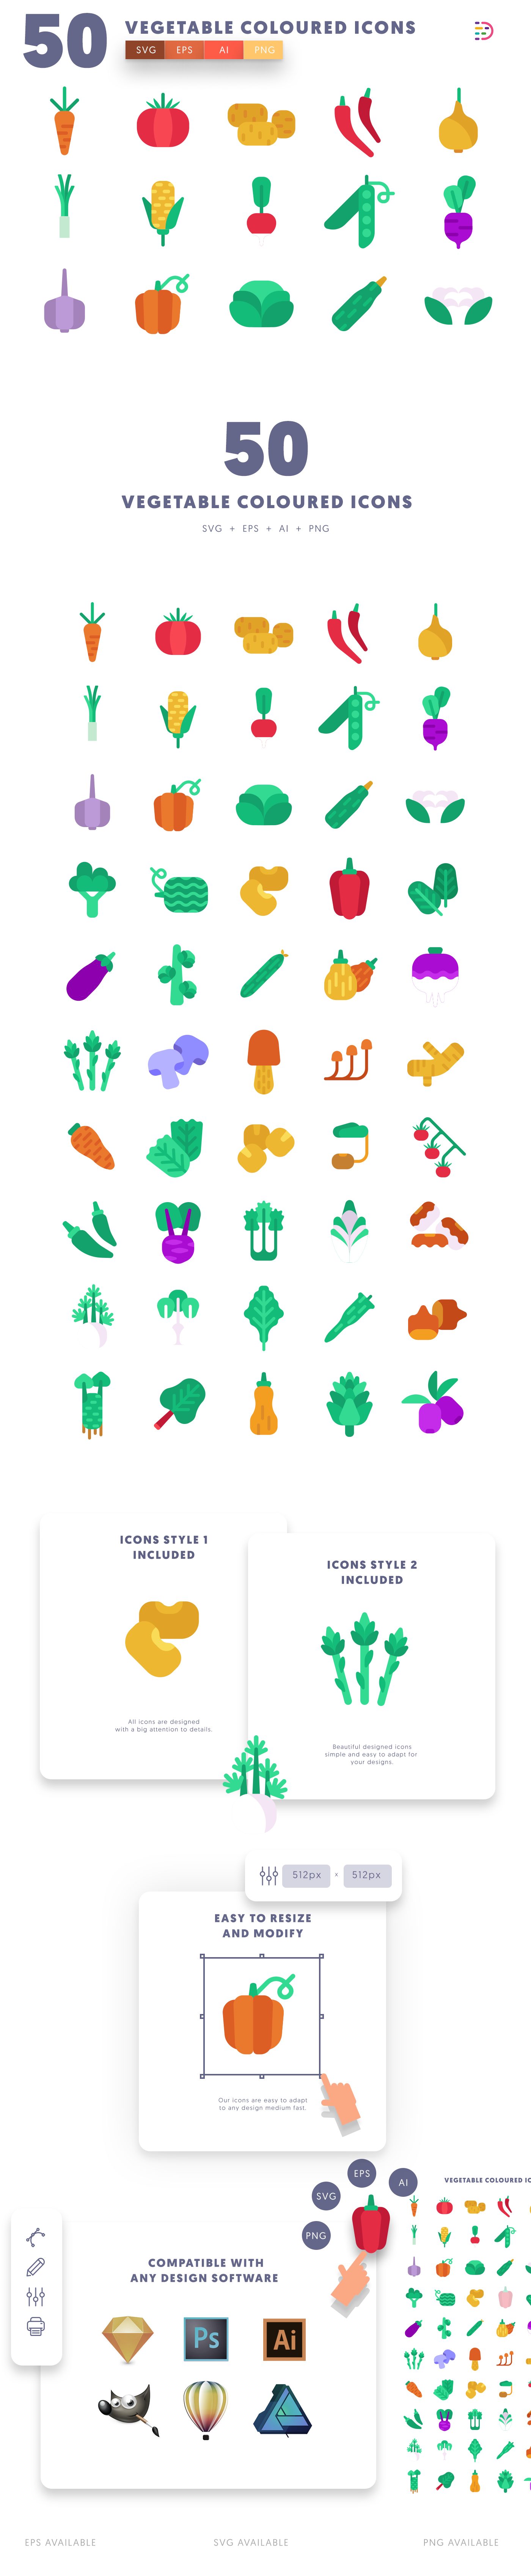 Editable vegetable coloured icon pack, easy to edit and customize icons